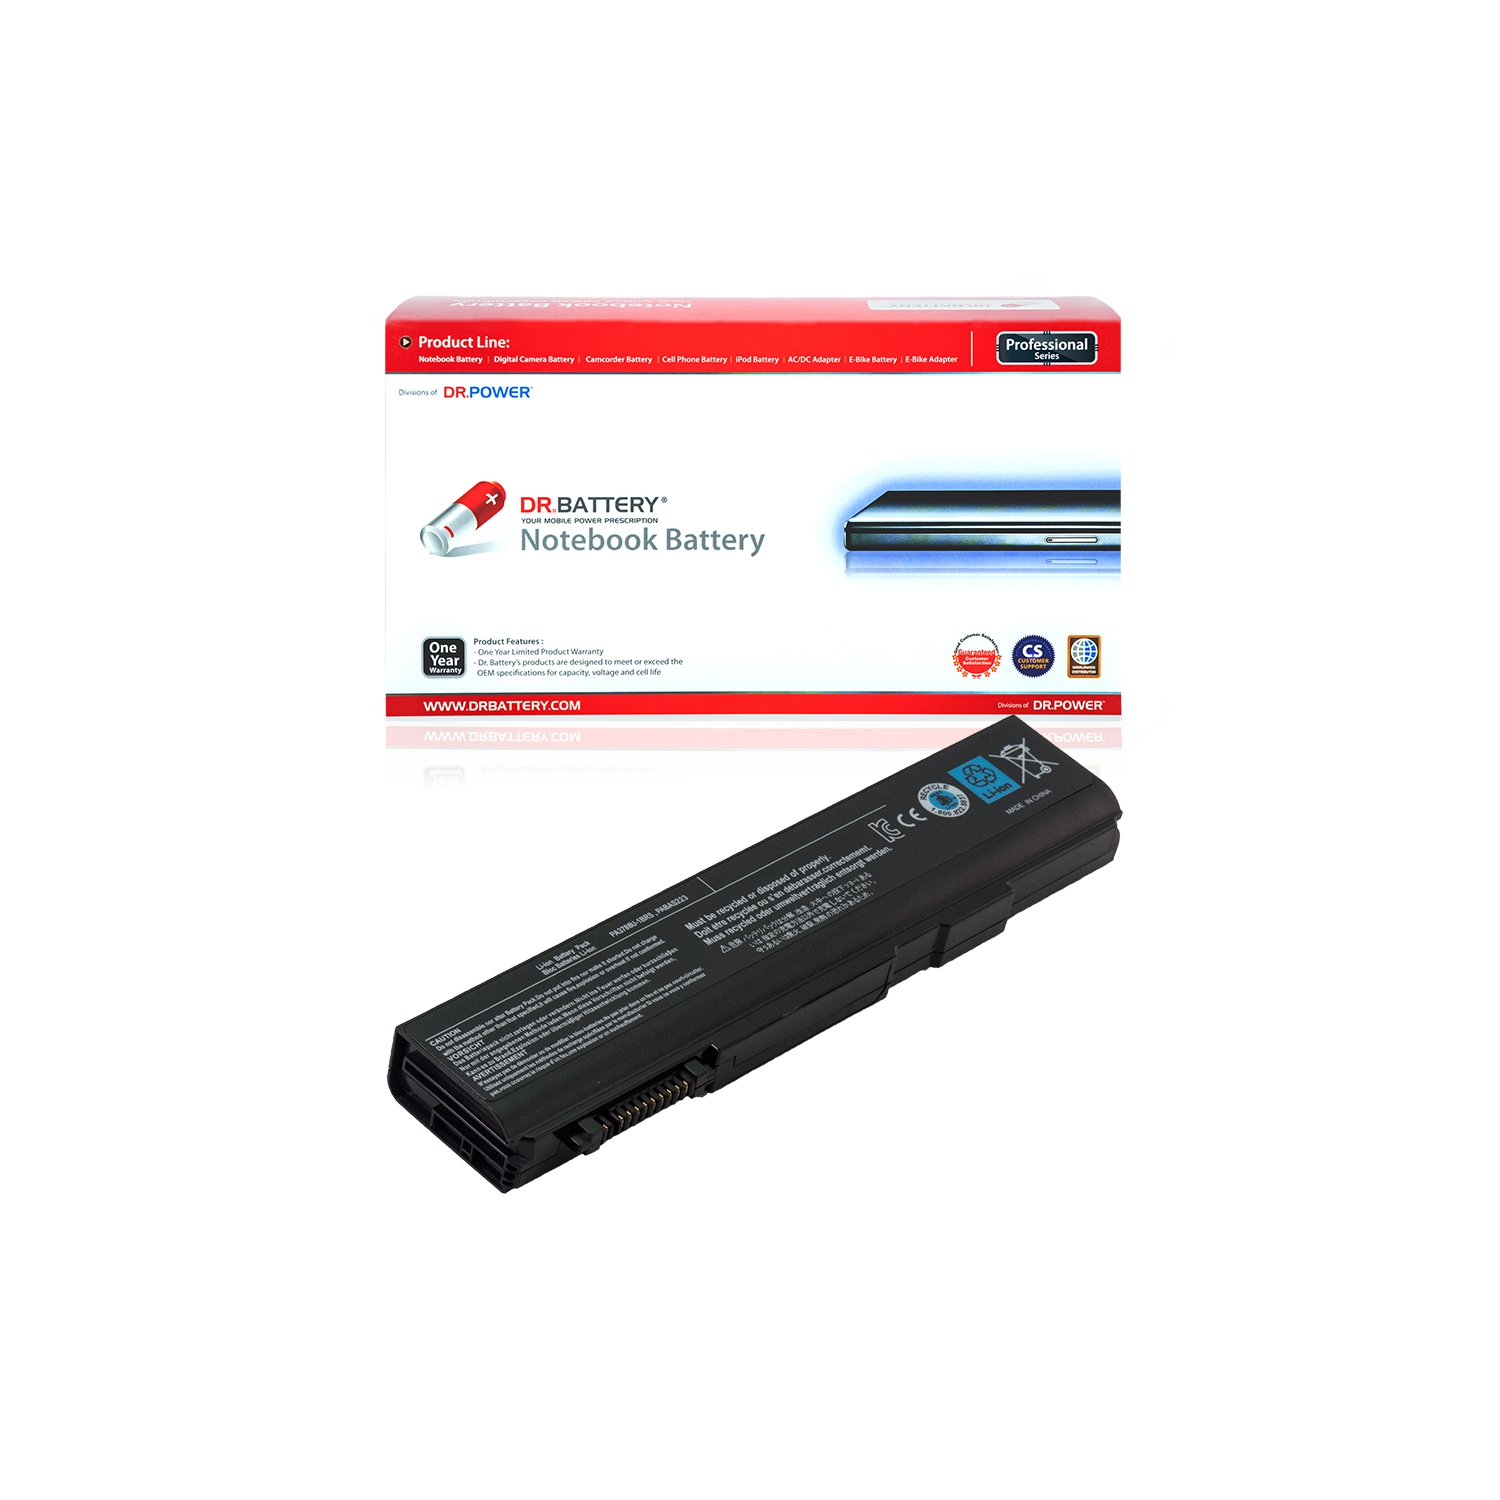 DR. BATTERY - Replacement for Toshiba Satellite Pro S750 / S500 / S500-00L / S500-00M / PABAS221 / PABAS222 / PABAS223